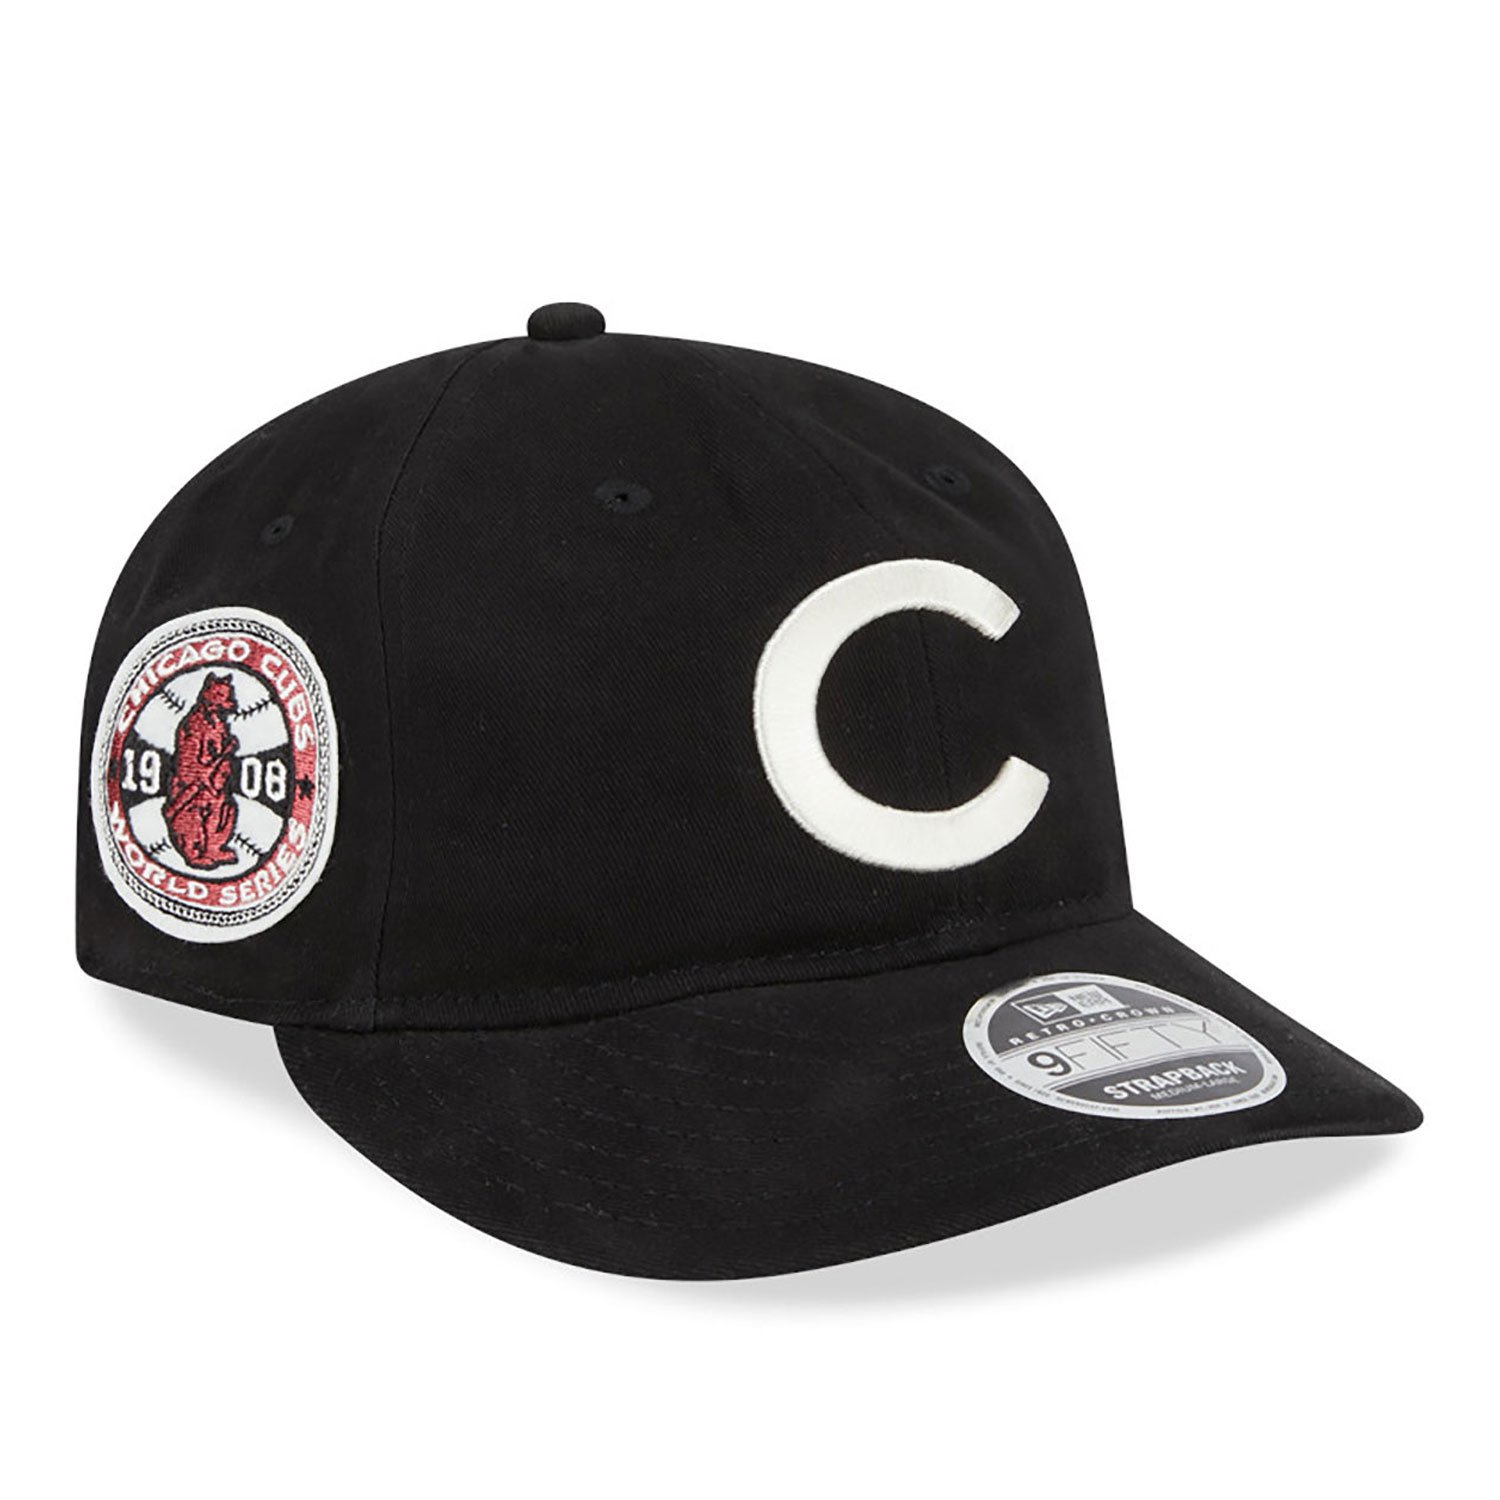 MLB Cooperstown Chicago Cubs Retro Crown 9FIFTY Cap D02_735